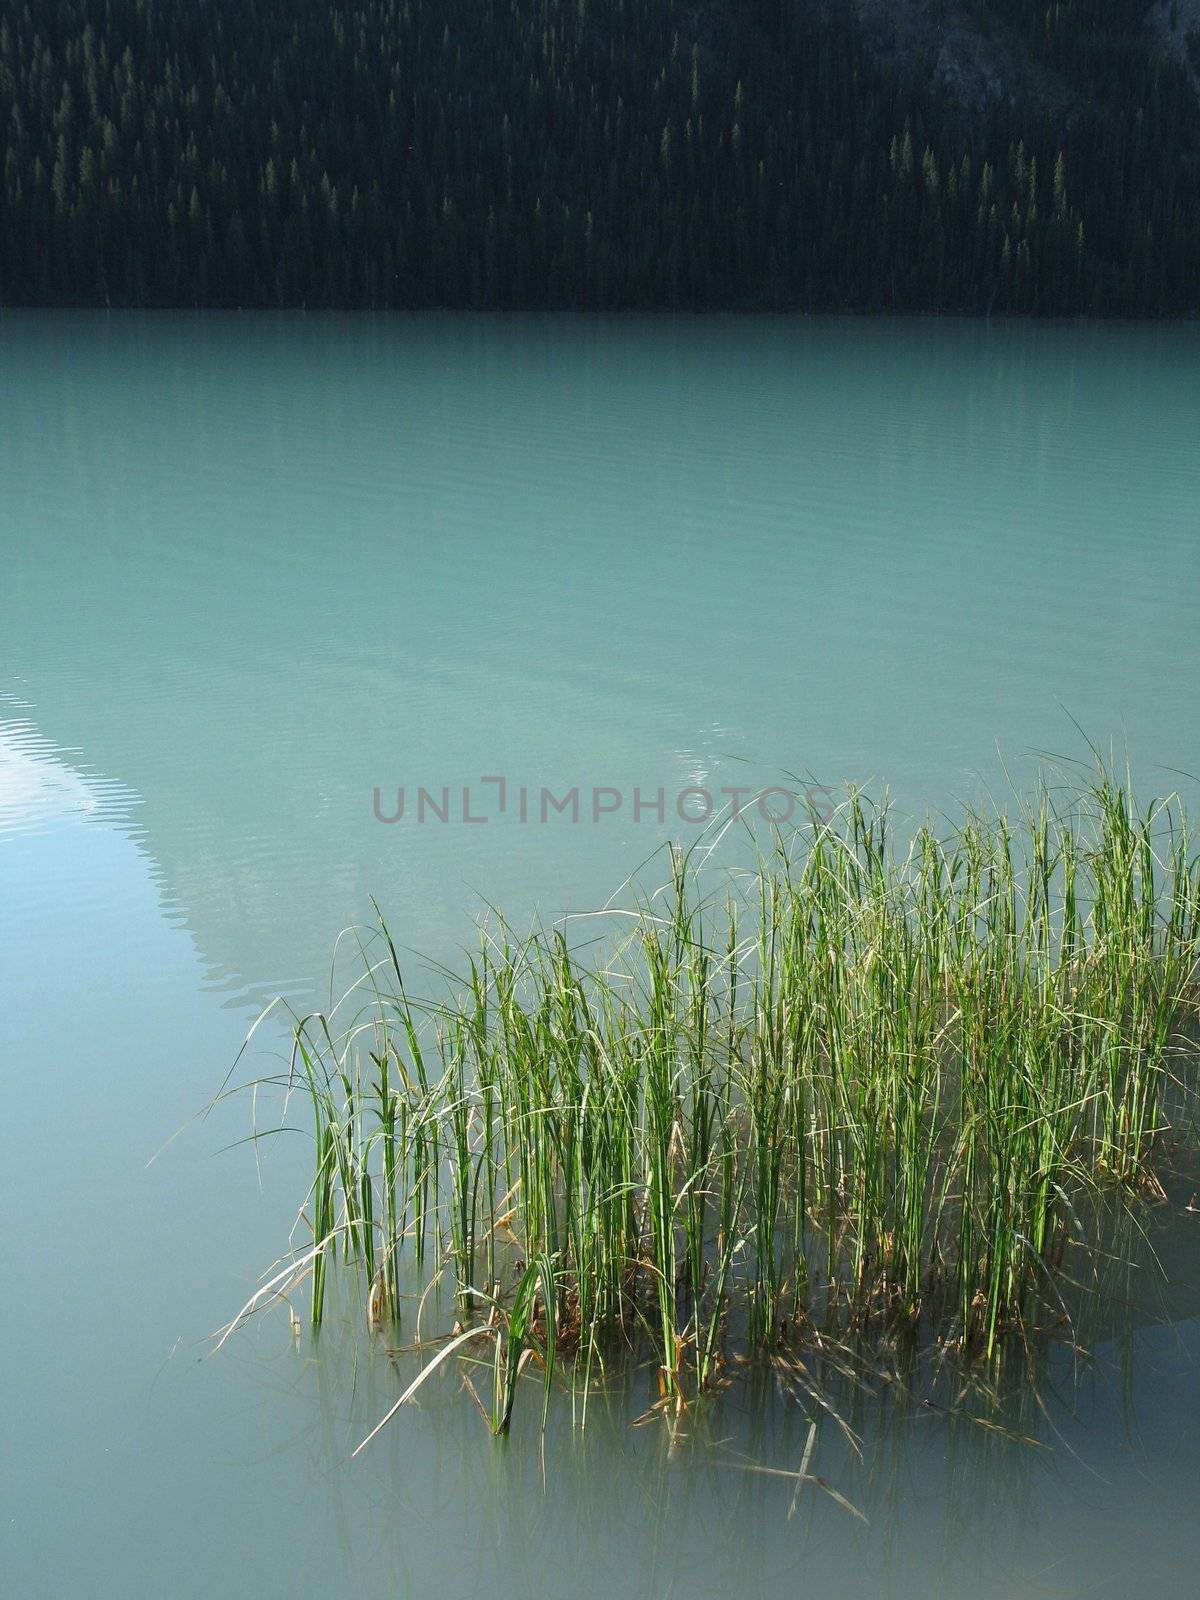 reeds in a green lake by mmm